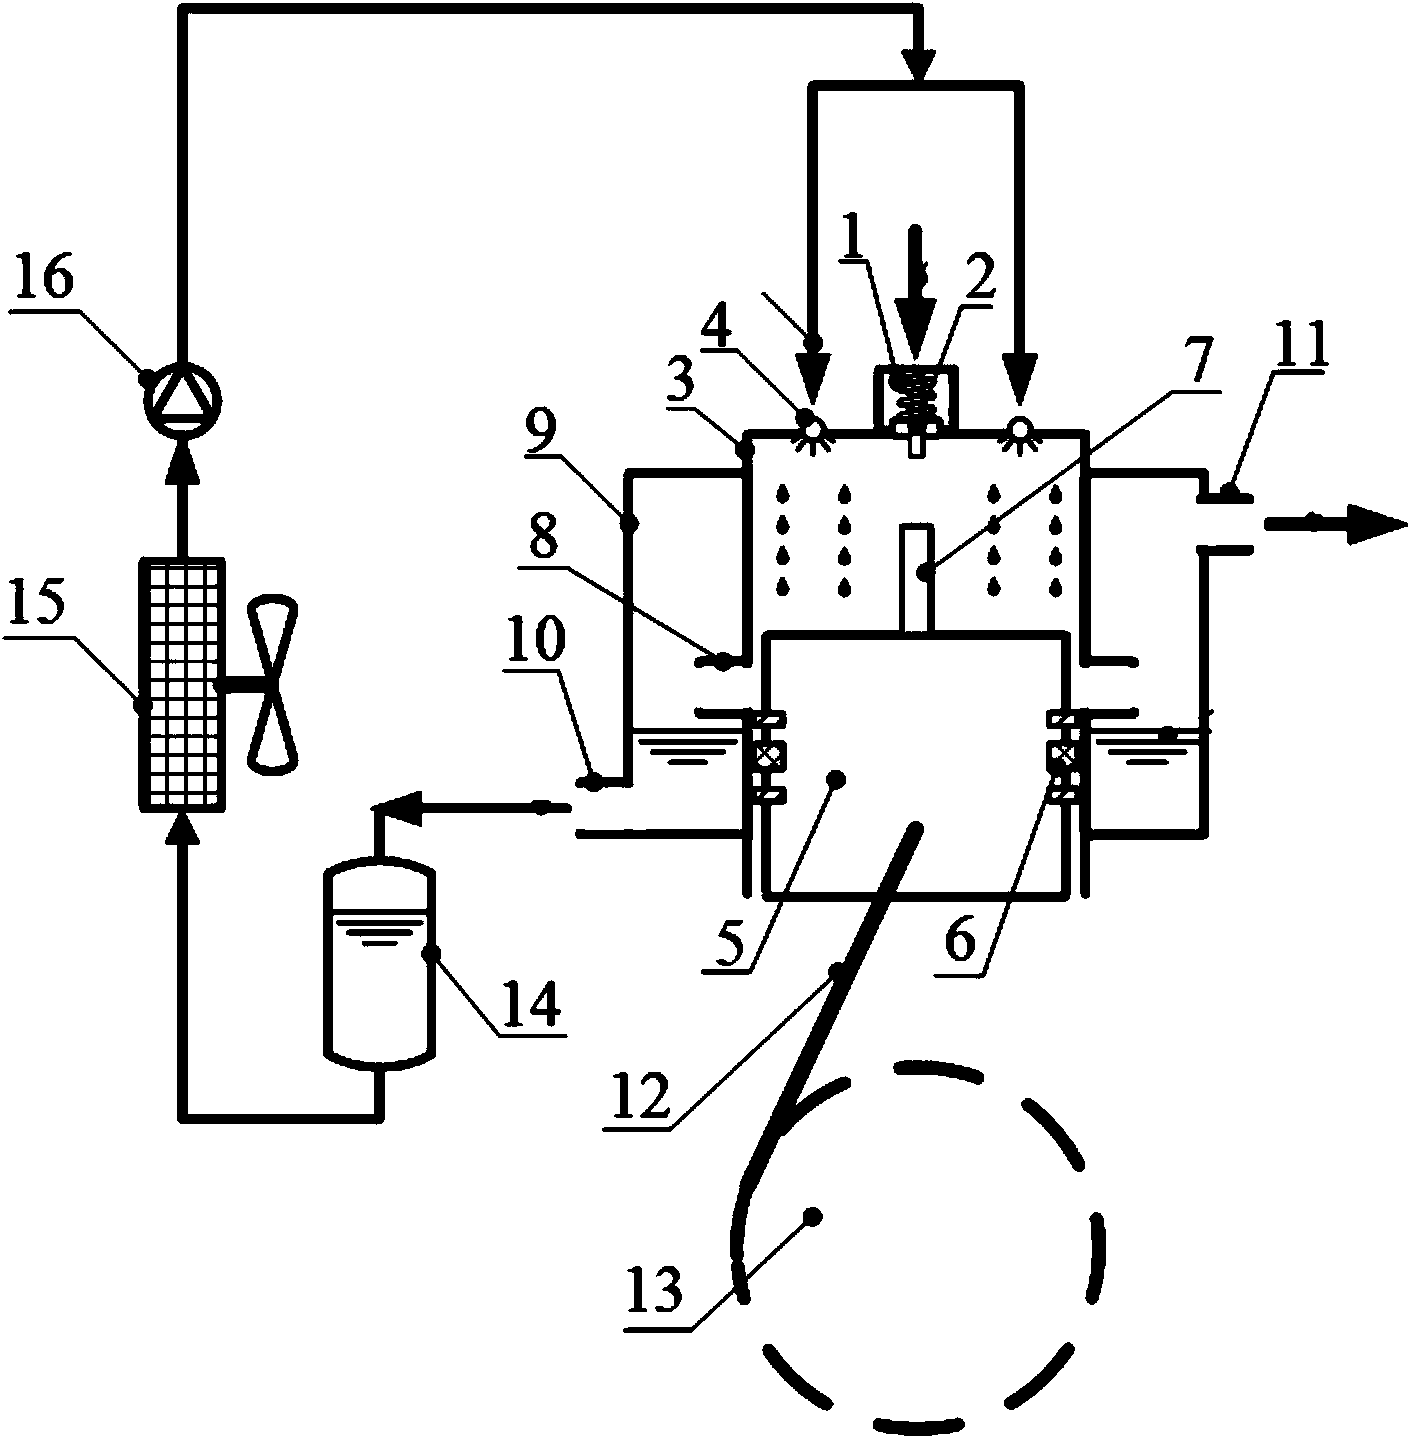 Single valve expander system capable of realizing isothermal expansion and method